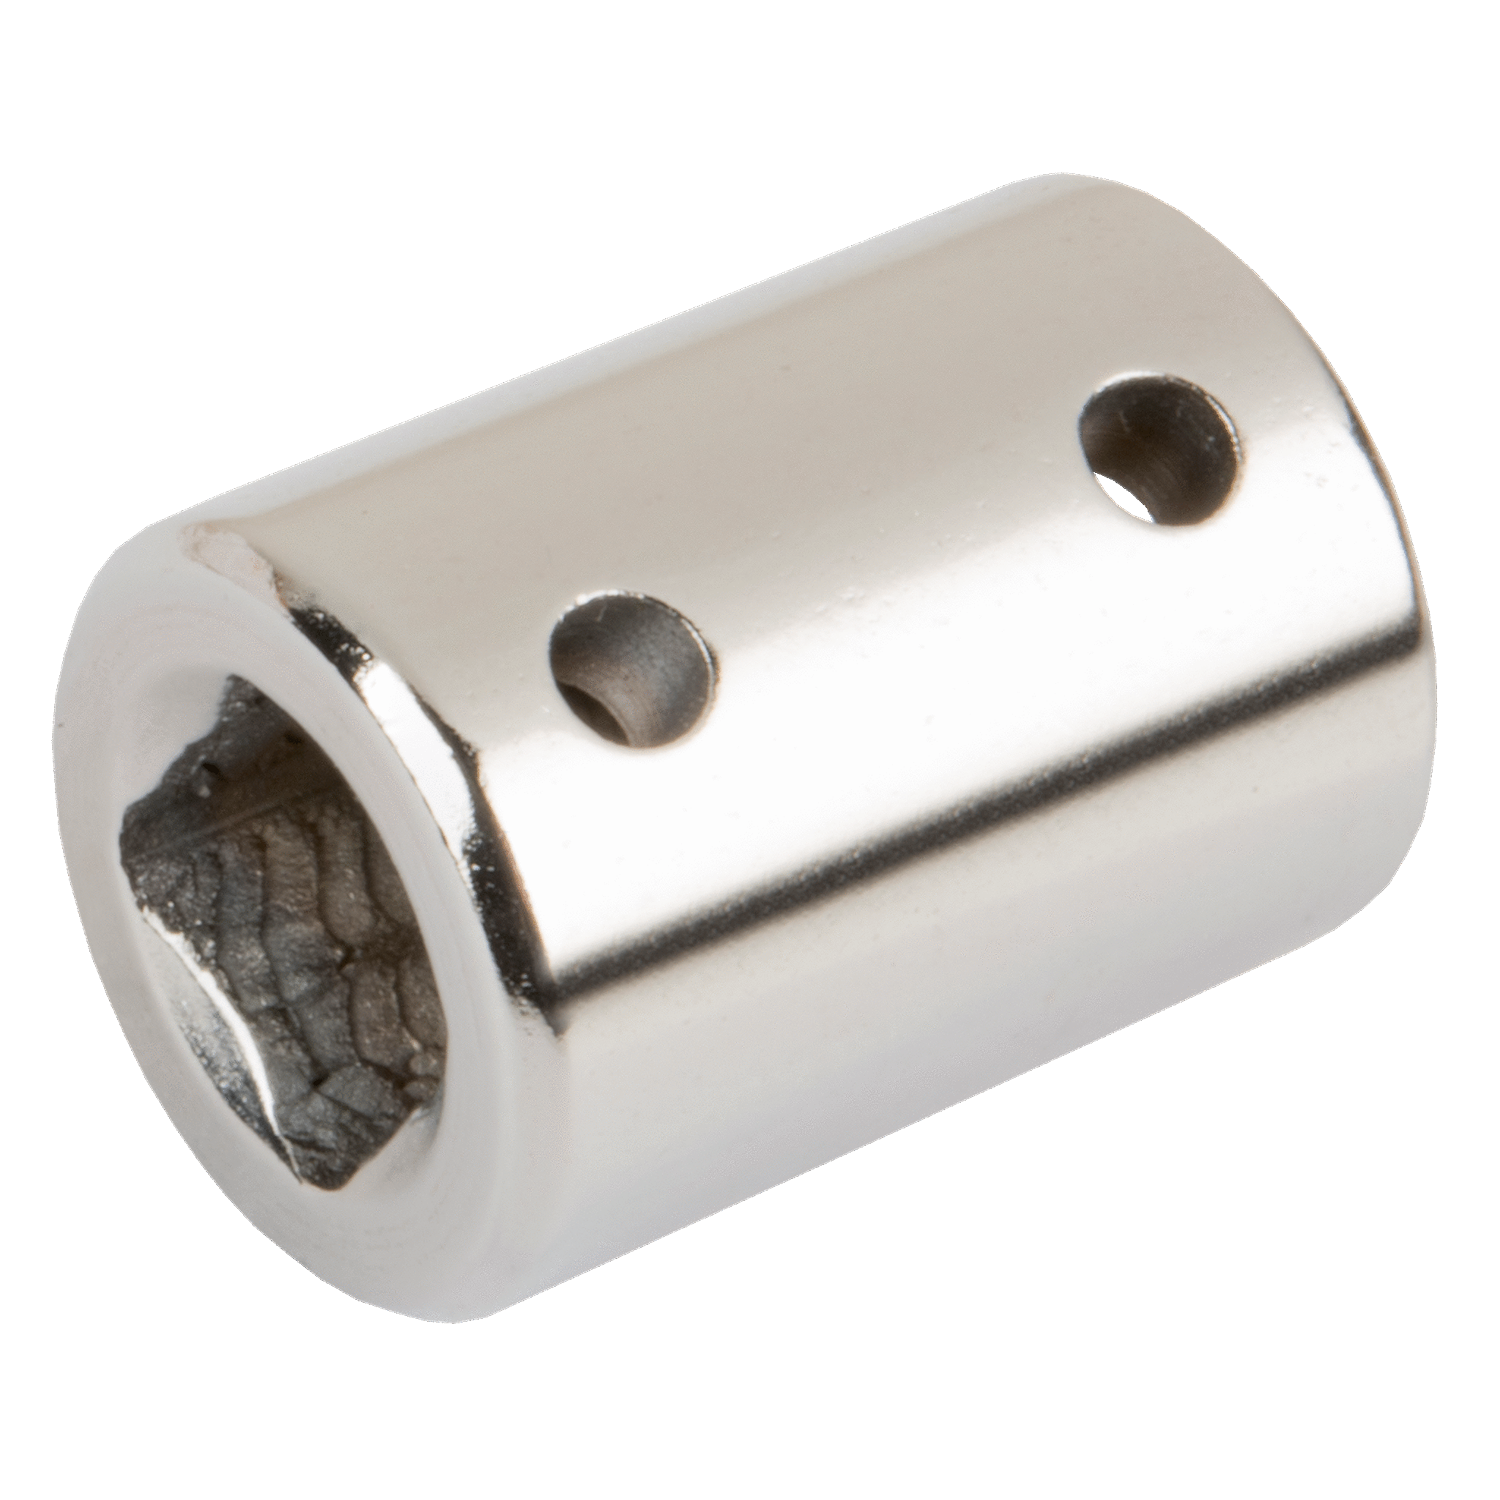 BAHCO R6967 1/4" Square Drive Female To Female Socket Adaptor - Premium Socket Adaptor from BAHCO - Shop now at Yew Aik.